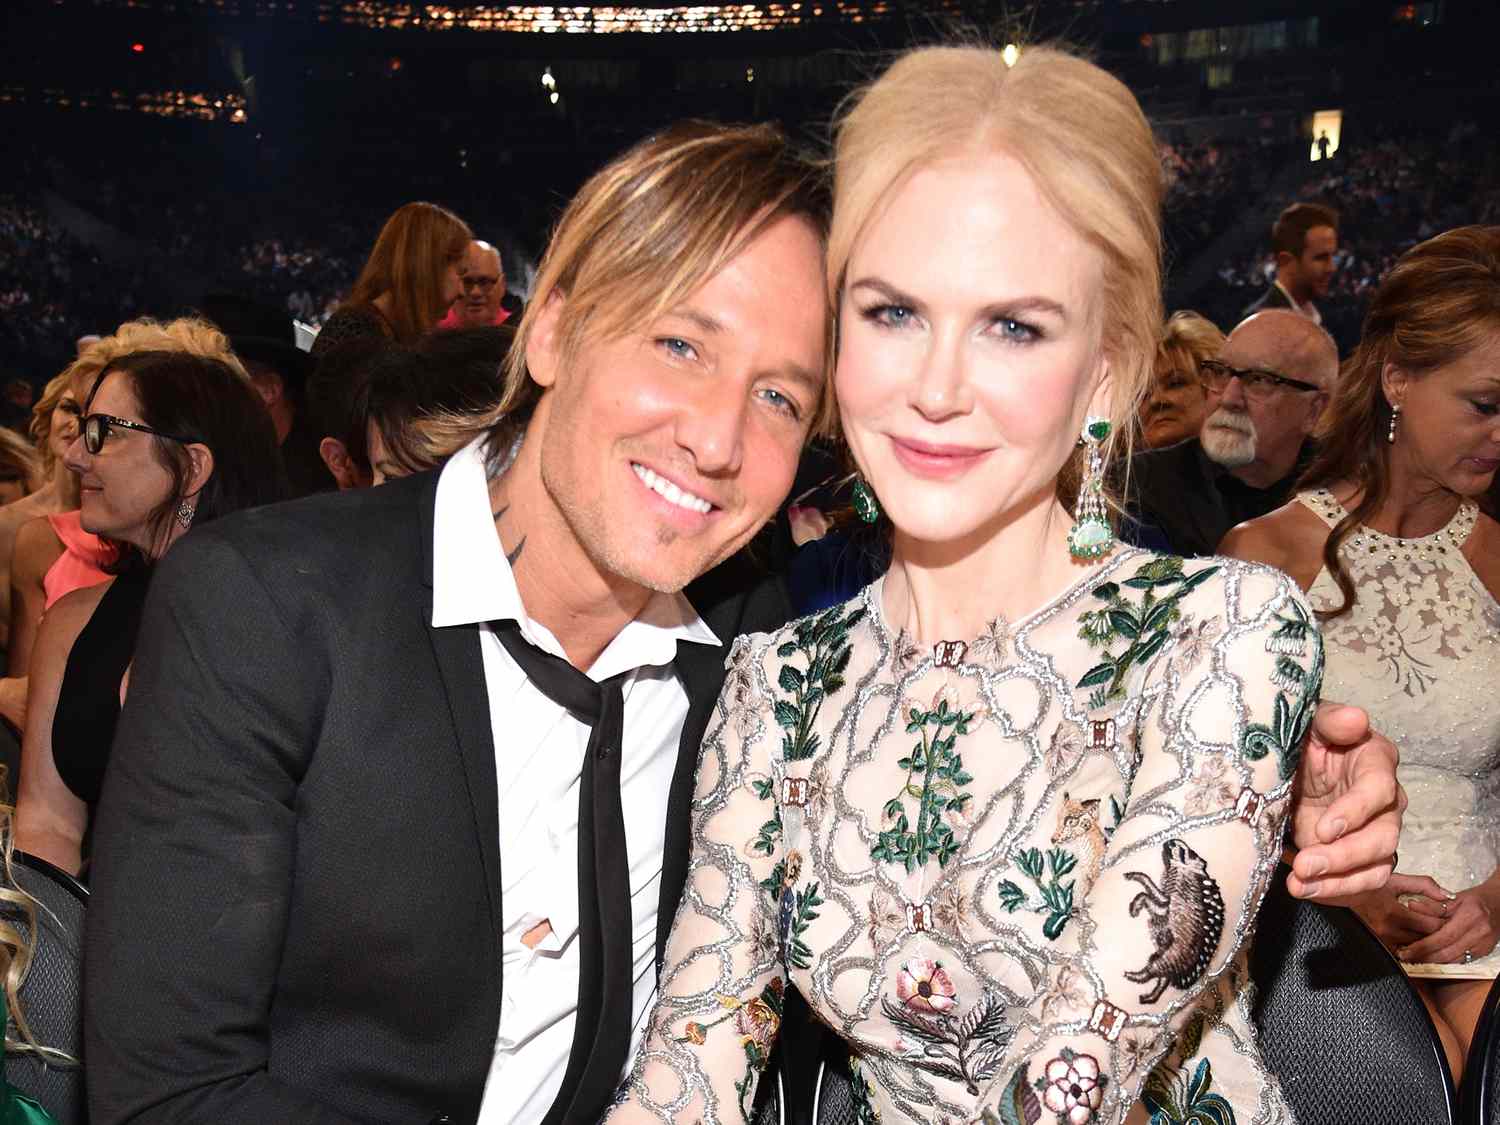 Keith Urban (L) and actor Nicole Kidman attend the 52nd Academy Of Country Music Awards at T-Mobile Arena on April 2, 2017 in Las Vegas, Nevada